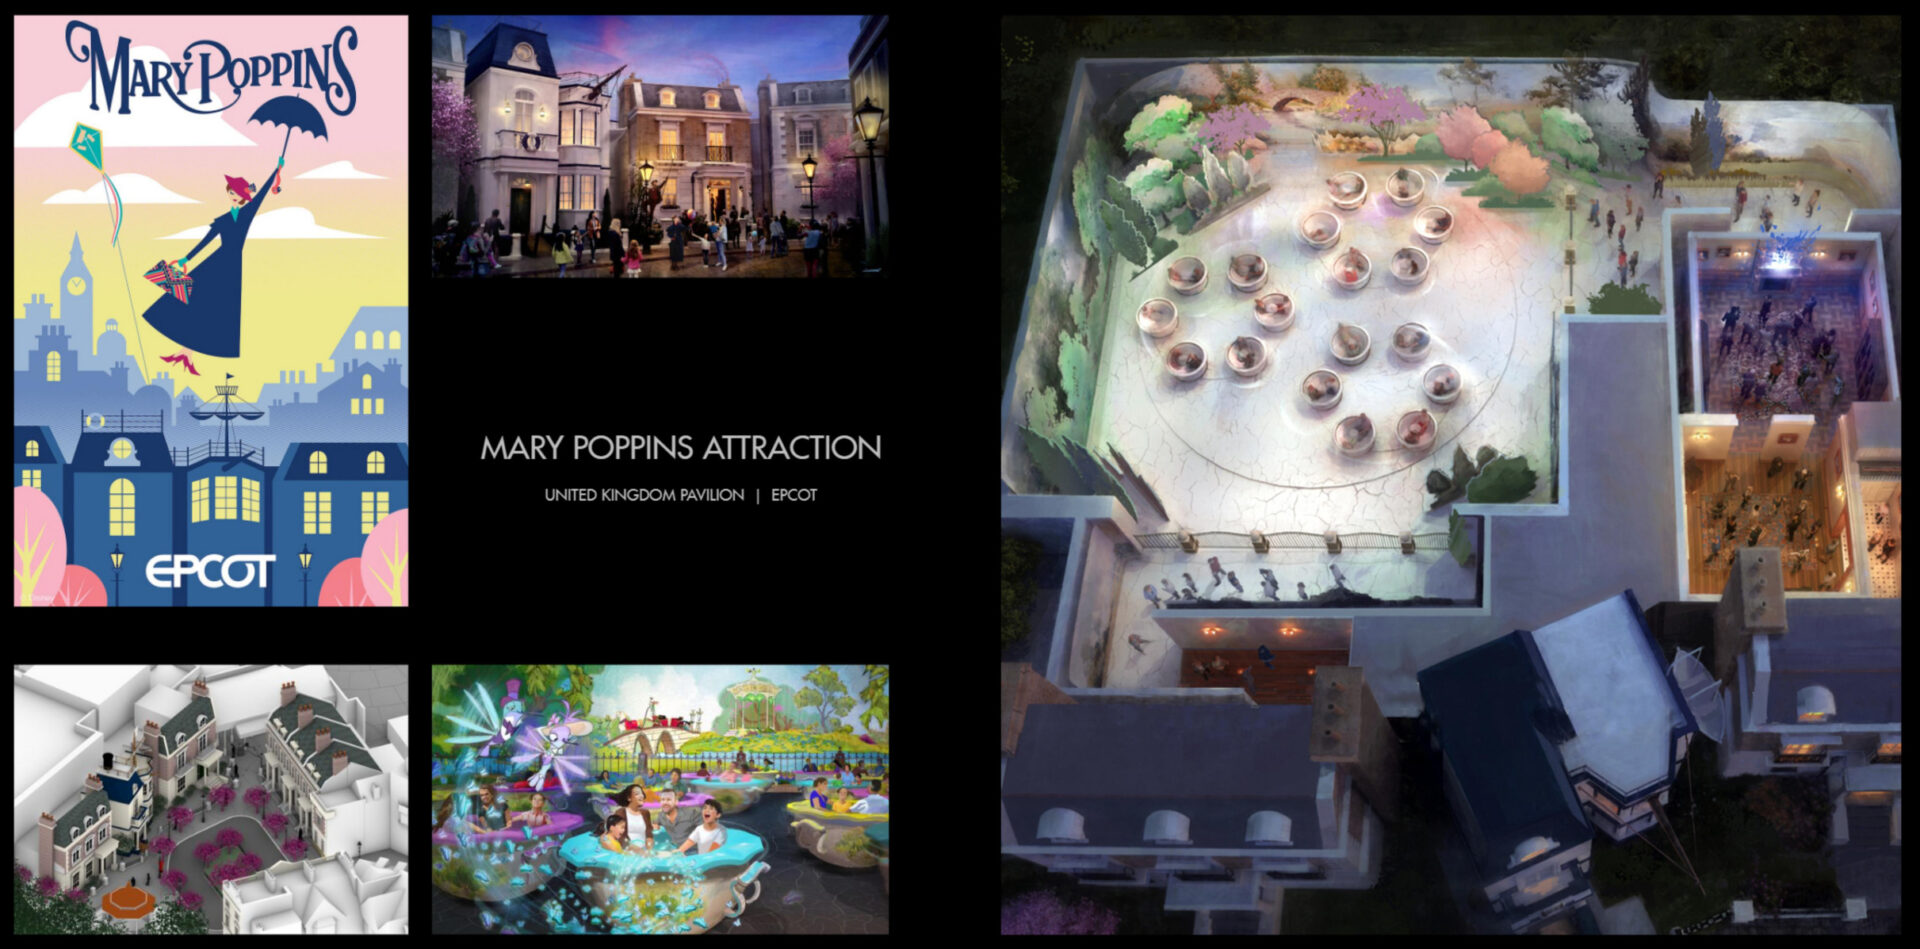 Former Walt Disney Imagineer Shares Inside Look at ‘On Hold’ Mary Poppins Attraction